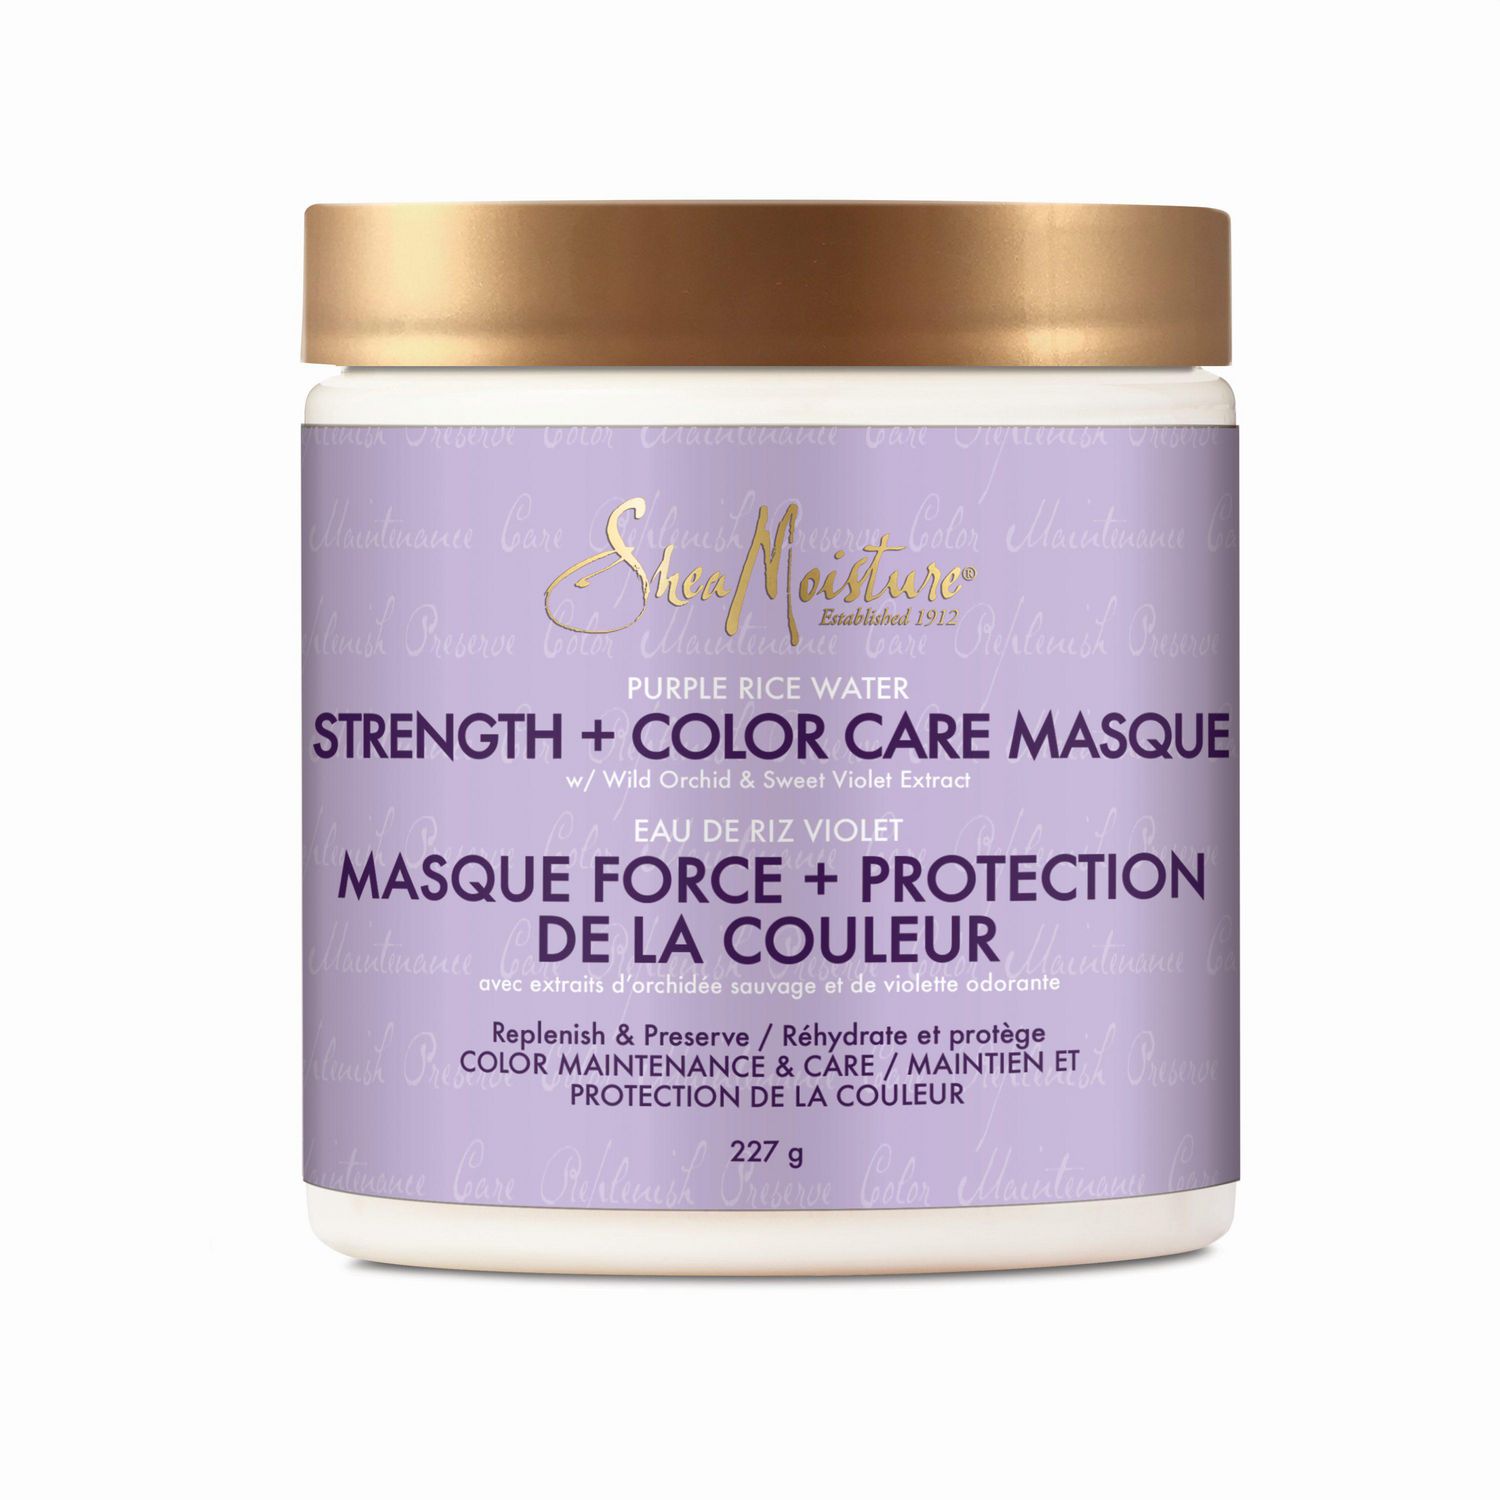 Shea Moisture Purple Rice Water Strenght & Color Masque